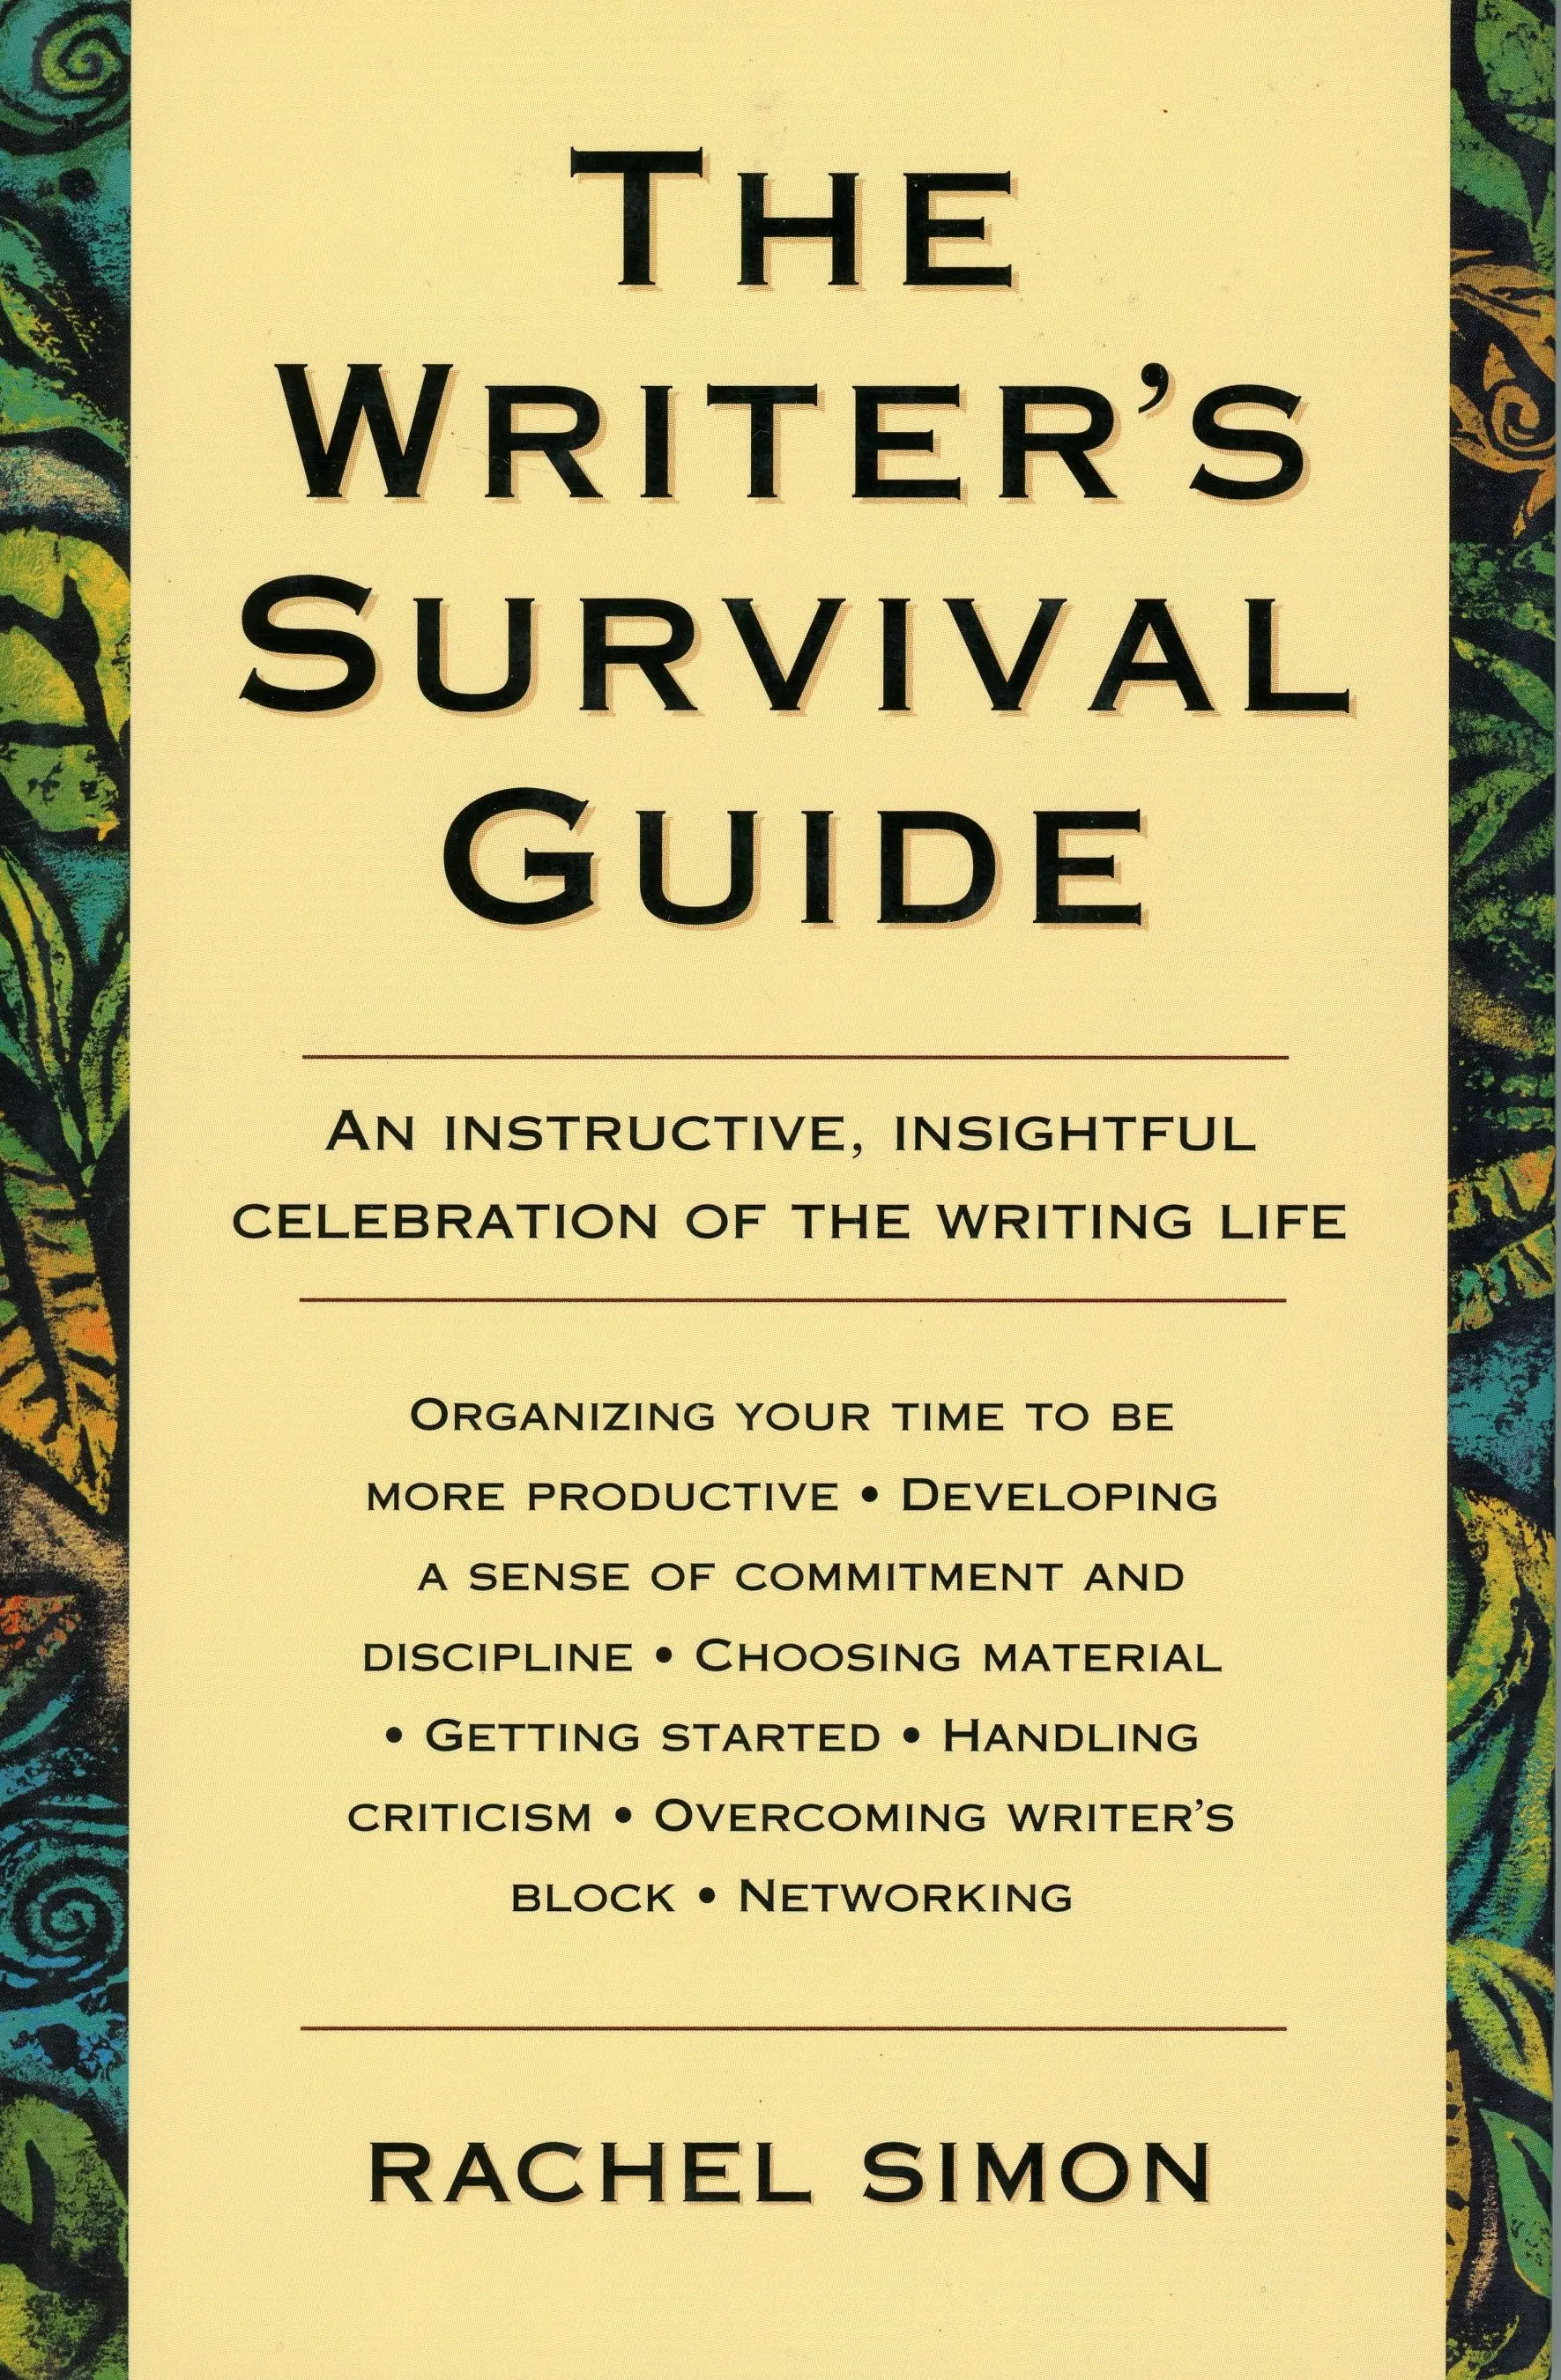 This image for The Writers Survival Guide